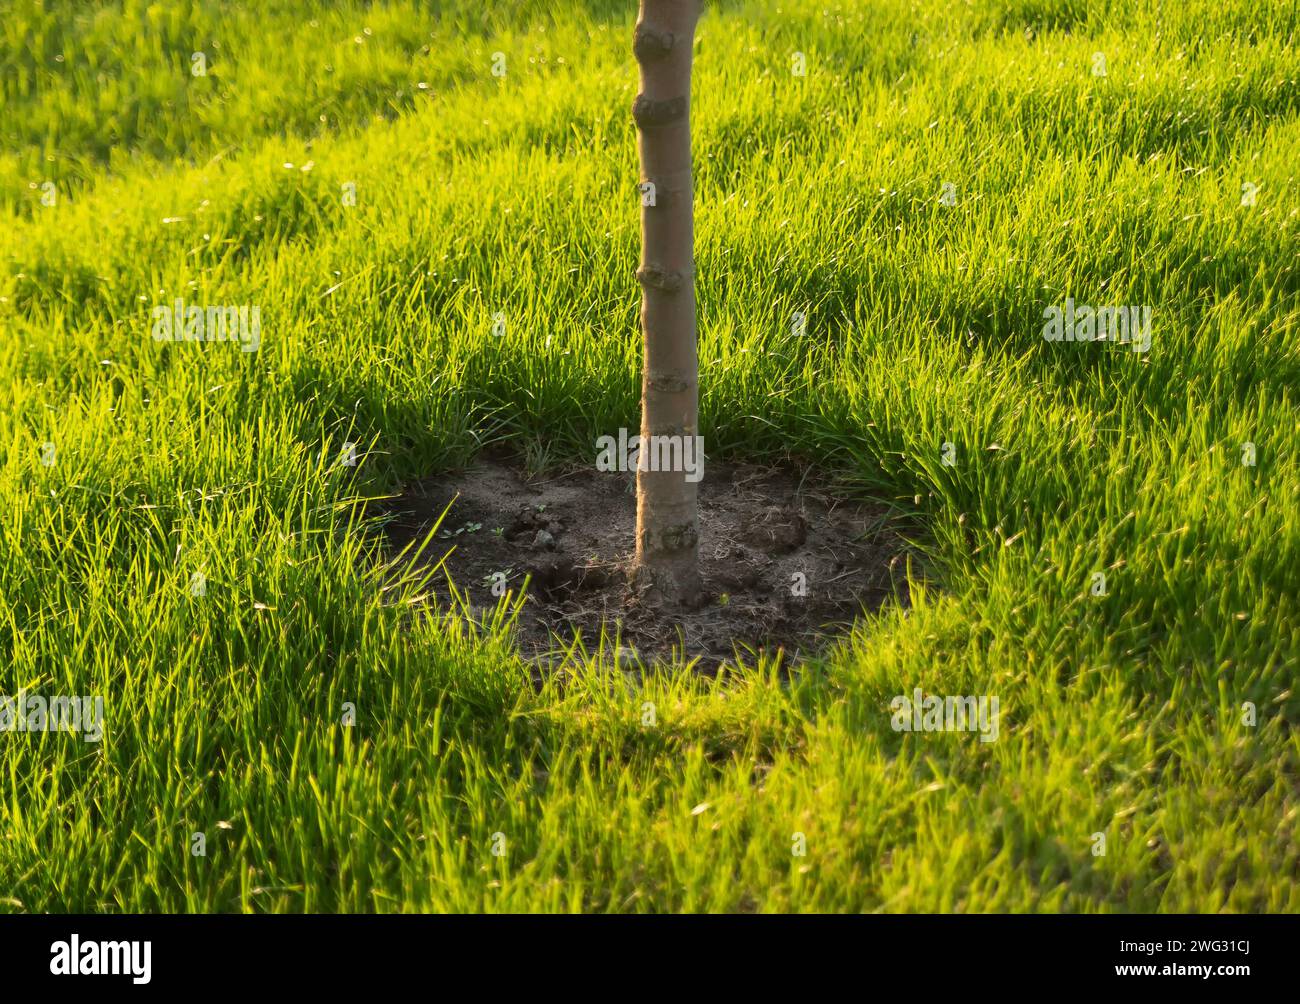 A young freshly planted tree on a green lawn in a garden or park. Ecology and environmental care concept. Stock Photo